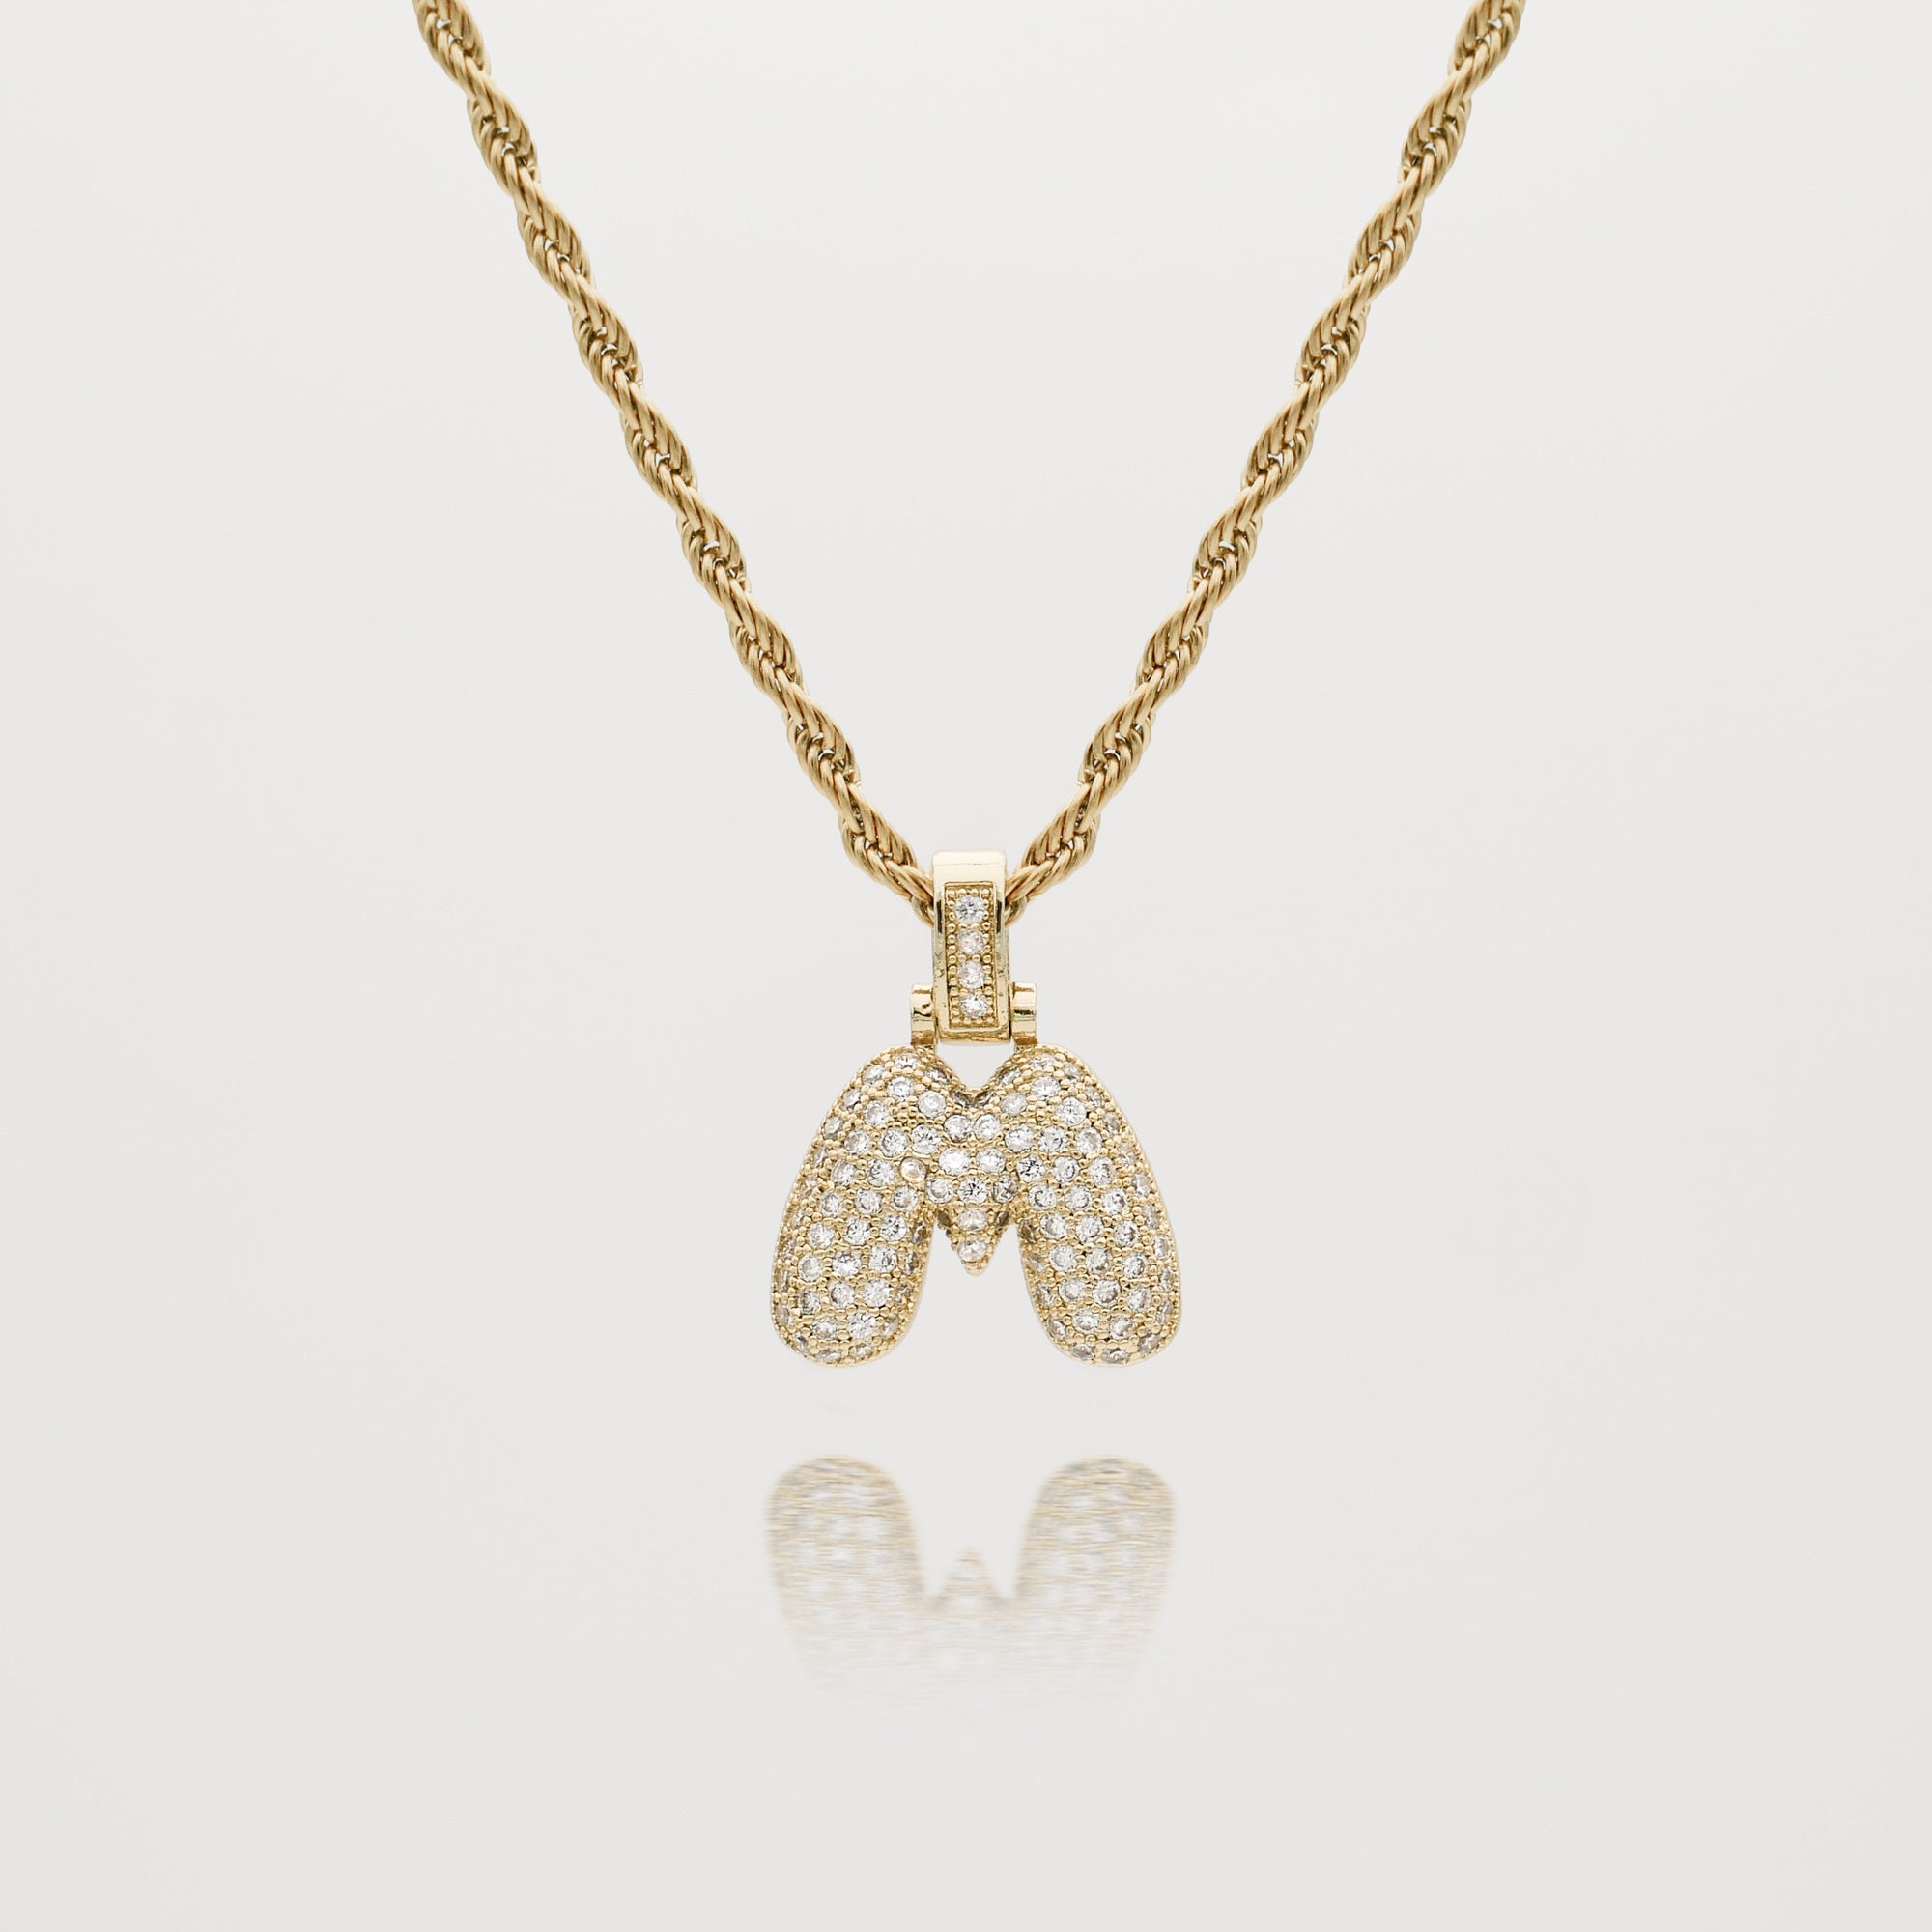 Pave Bubble Letter Initial Necklace encrusted with radiant CZ stones in gold rope chain